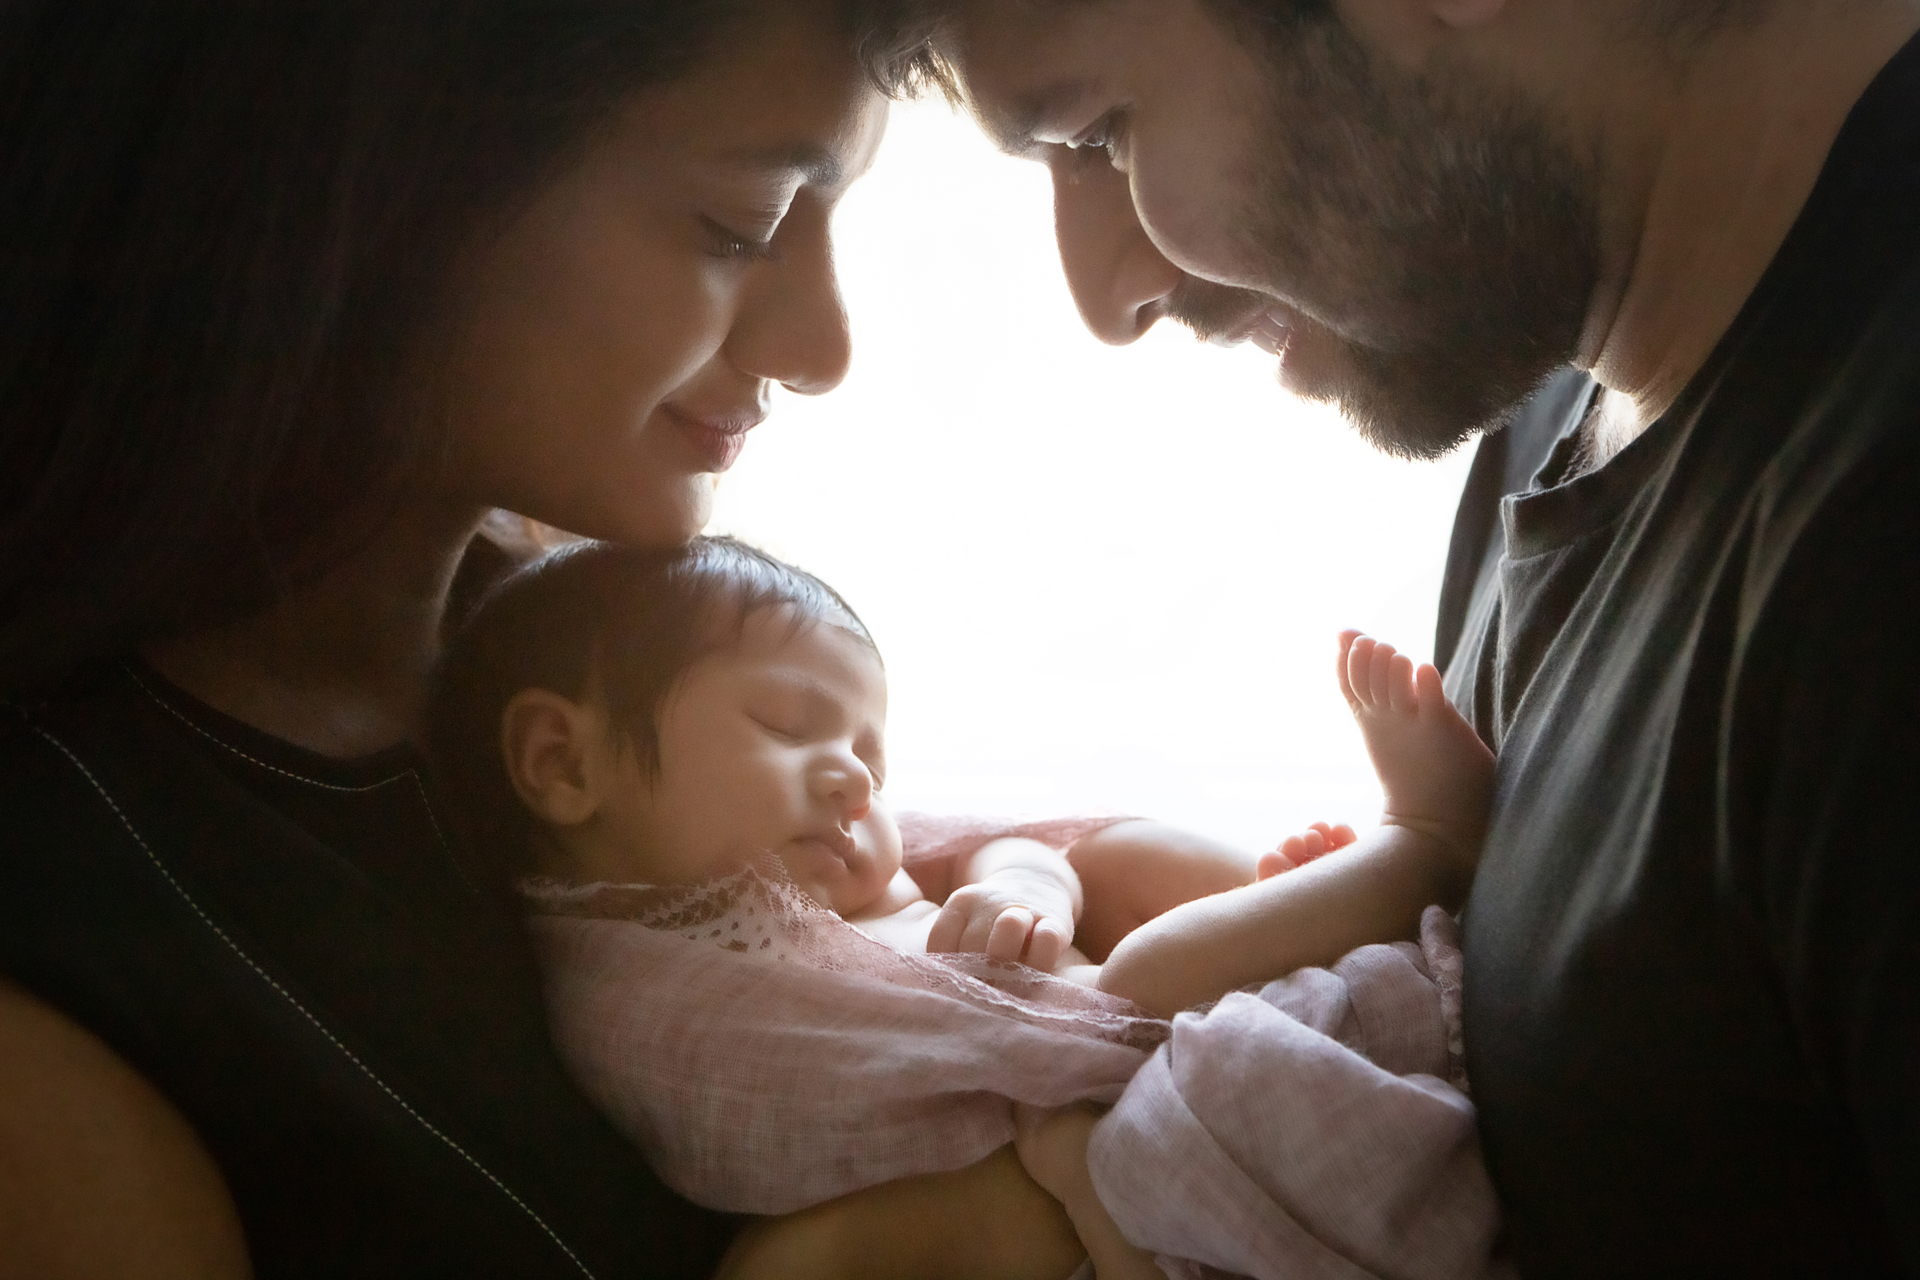 silhouetted image of new parents looking down at their newborn baby girl who is asleep with one foot propped on dad